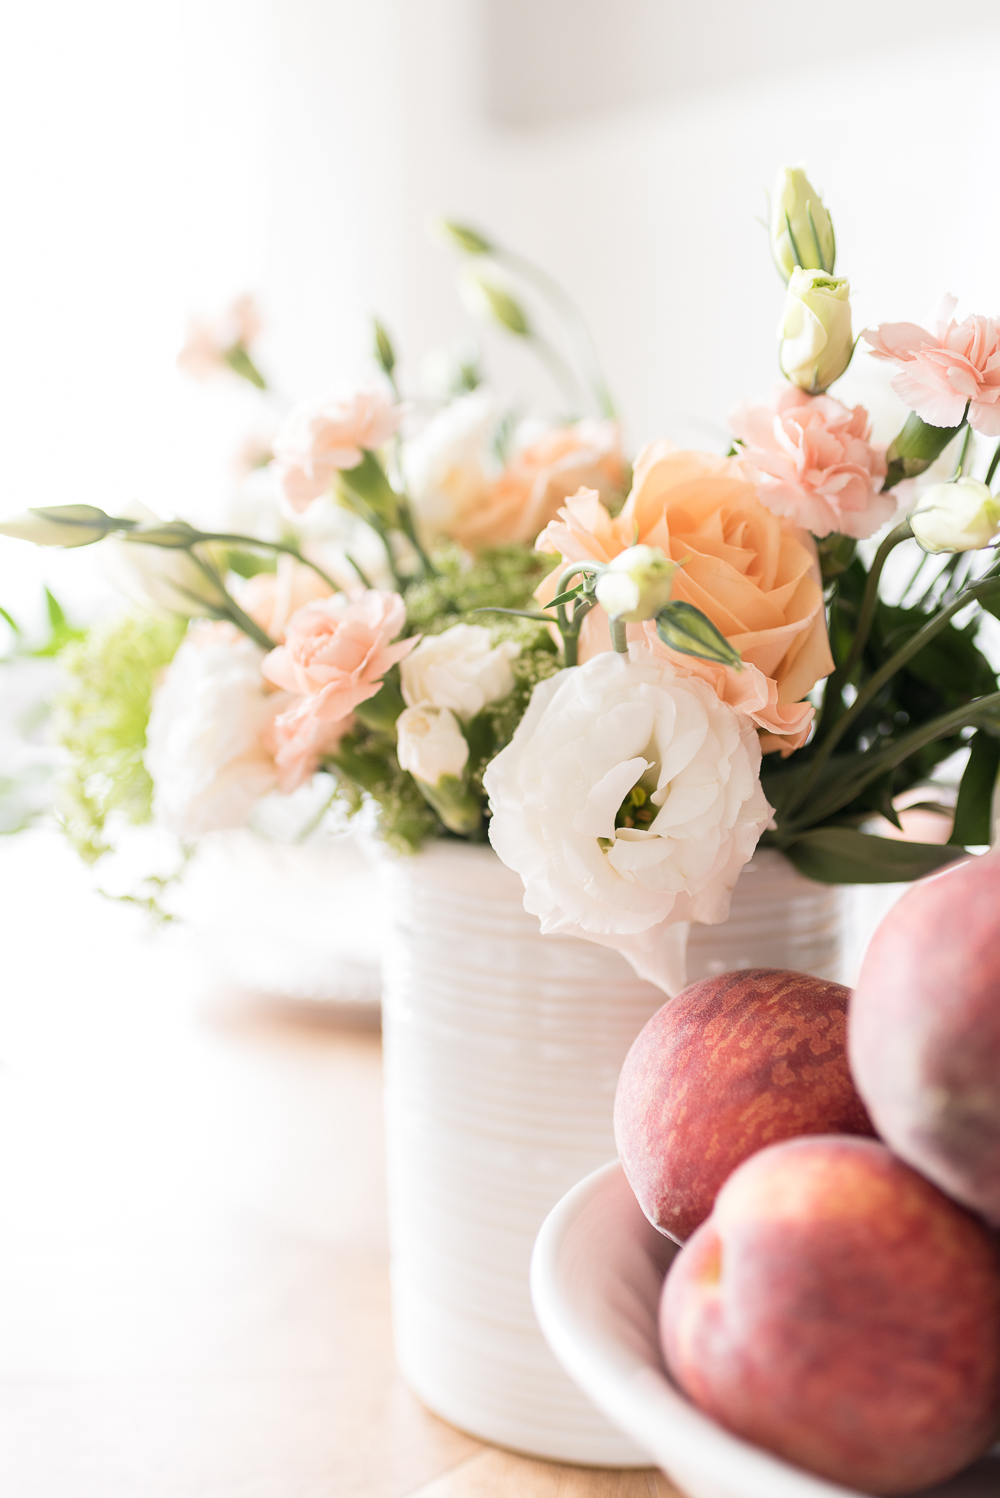 Fresh flowers in soft peach, blush and cream hues paired with a bowl of juicy peaches make an effortless centerpiece for a simple summer gathering.